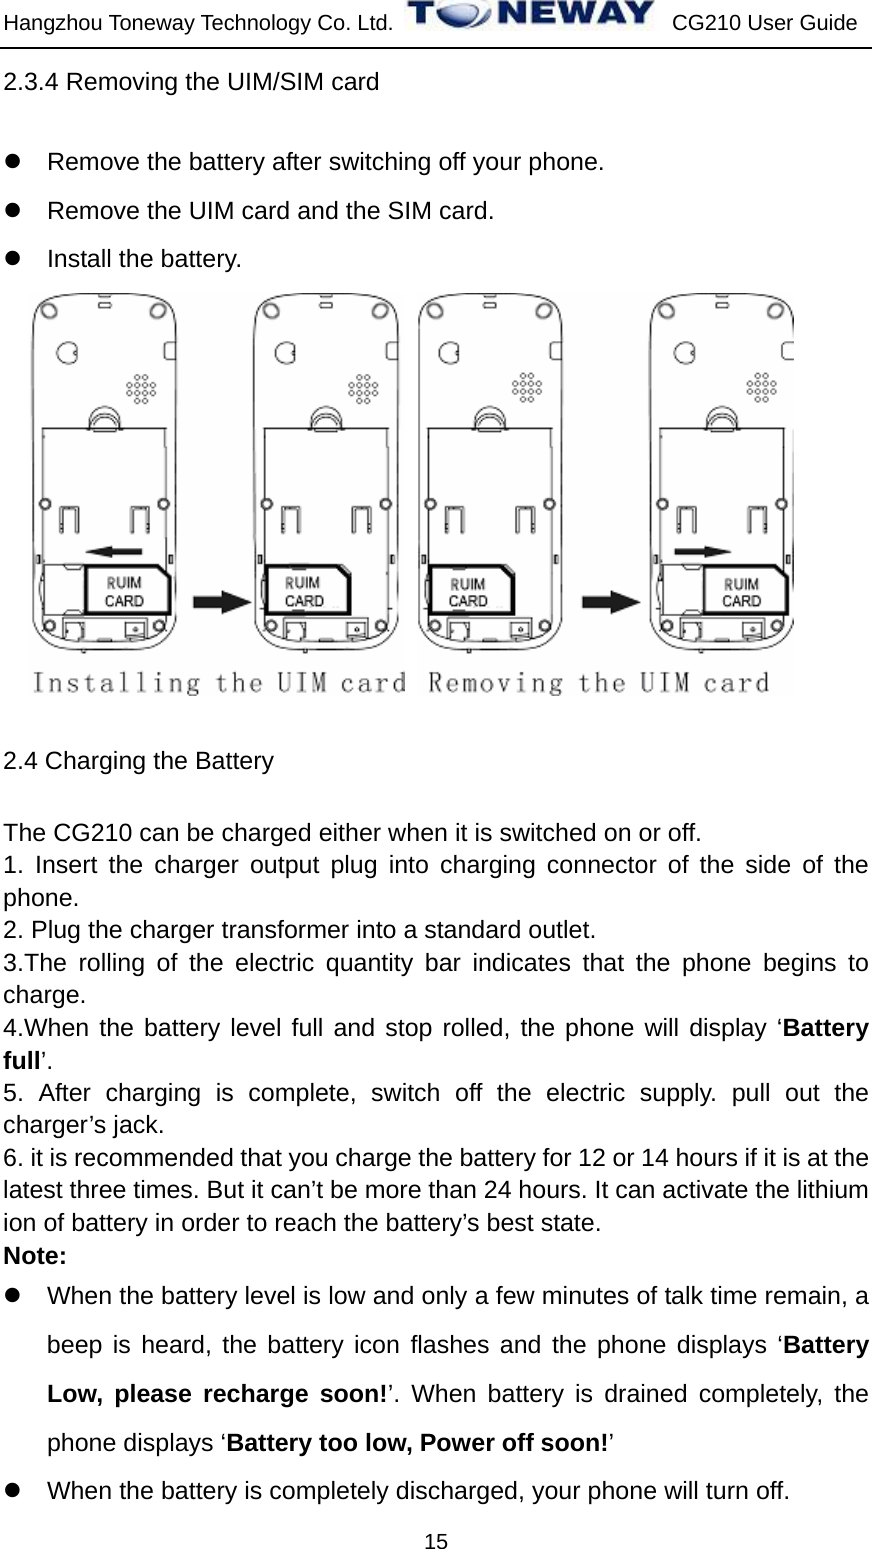 Hangzhou Toneway Technology Co. Ltd.    CG210 User Guide 15 2.3.4 Removing the UIM/SIM card z  Remove the battery after switching off your phone. z  Remove the UIM card and the SIM card. z  Install the battery.       2.4 Charging the Battery The CG210 can be charged either when it is switched on or off. 1. Insert the charger output plug into charging connector of the side of the phone. 2. Plug the charger transformer into a standard outlet. 3.The rolling of the electric quantity bar indicates that the phone begins to charge. 4.When the battery level full and stop rolled, the phone will display ‘Battery full’. 5. After charging is complete, switch off the electric supply. pull out the charger’s jack. 6. it is recommended that you charge the battery for 12 or 14 hours if it is at the latest three times. But it can’t be more than 24 hours. It can activate the lithium ion of battery in order to reach the battery’s best state. Note: z  When the battery level is low and only a few minutes of talk time remain, a beep is heard, the battery icon flashes and the phone displays ‘Battery Low, please recharge soon!’. When battery is drained completely, the phone displays ‘Battery too low, Power off soon!’ z  When the battery is completely discharged, your phone will turn off. 